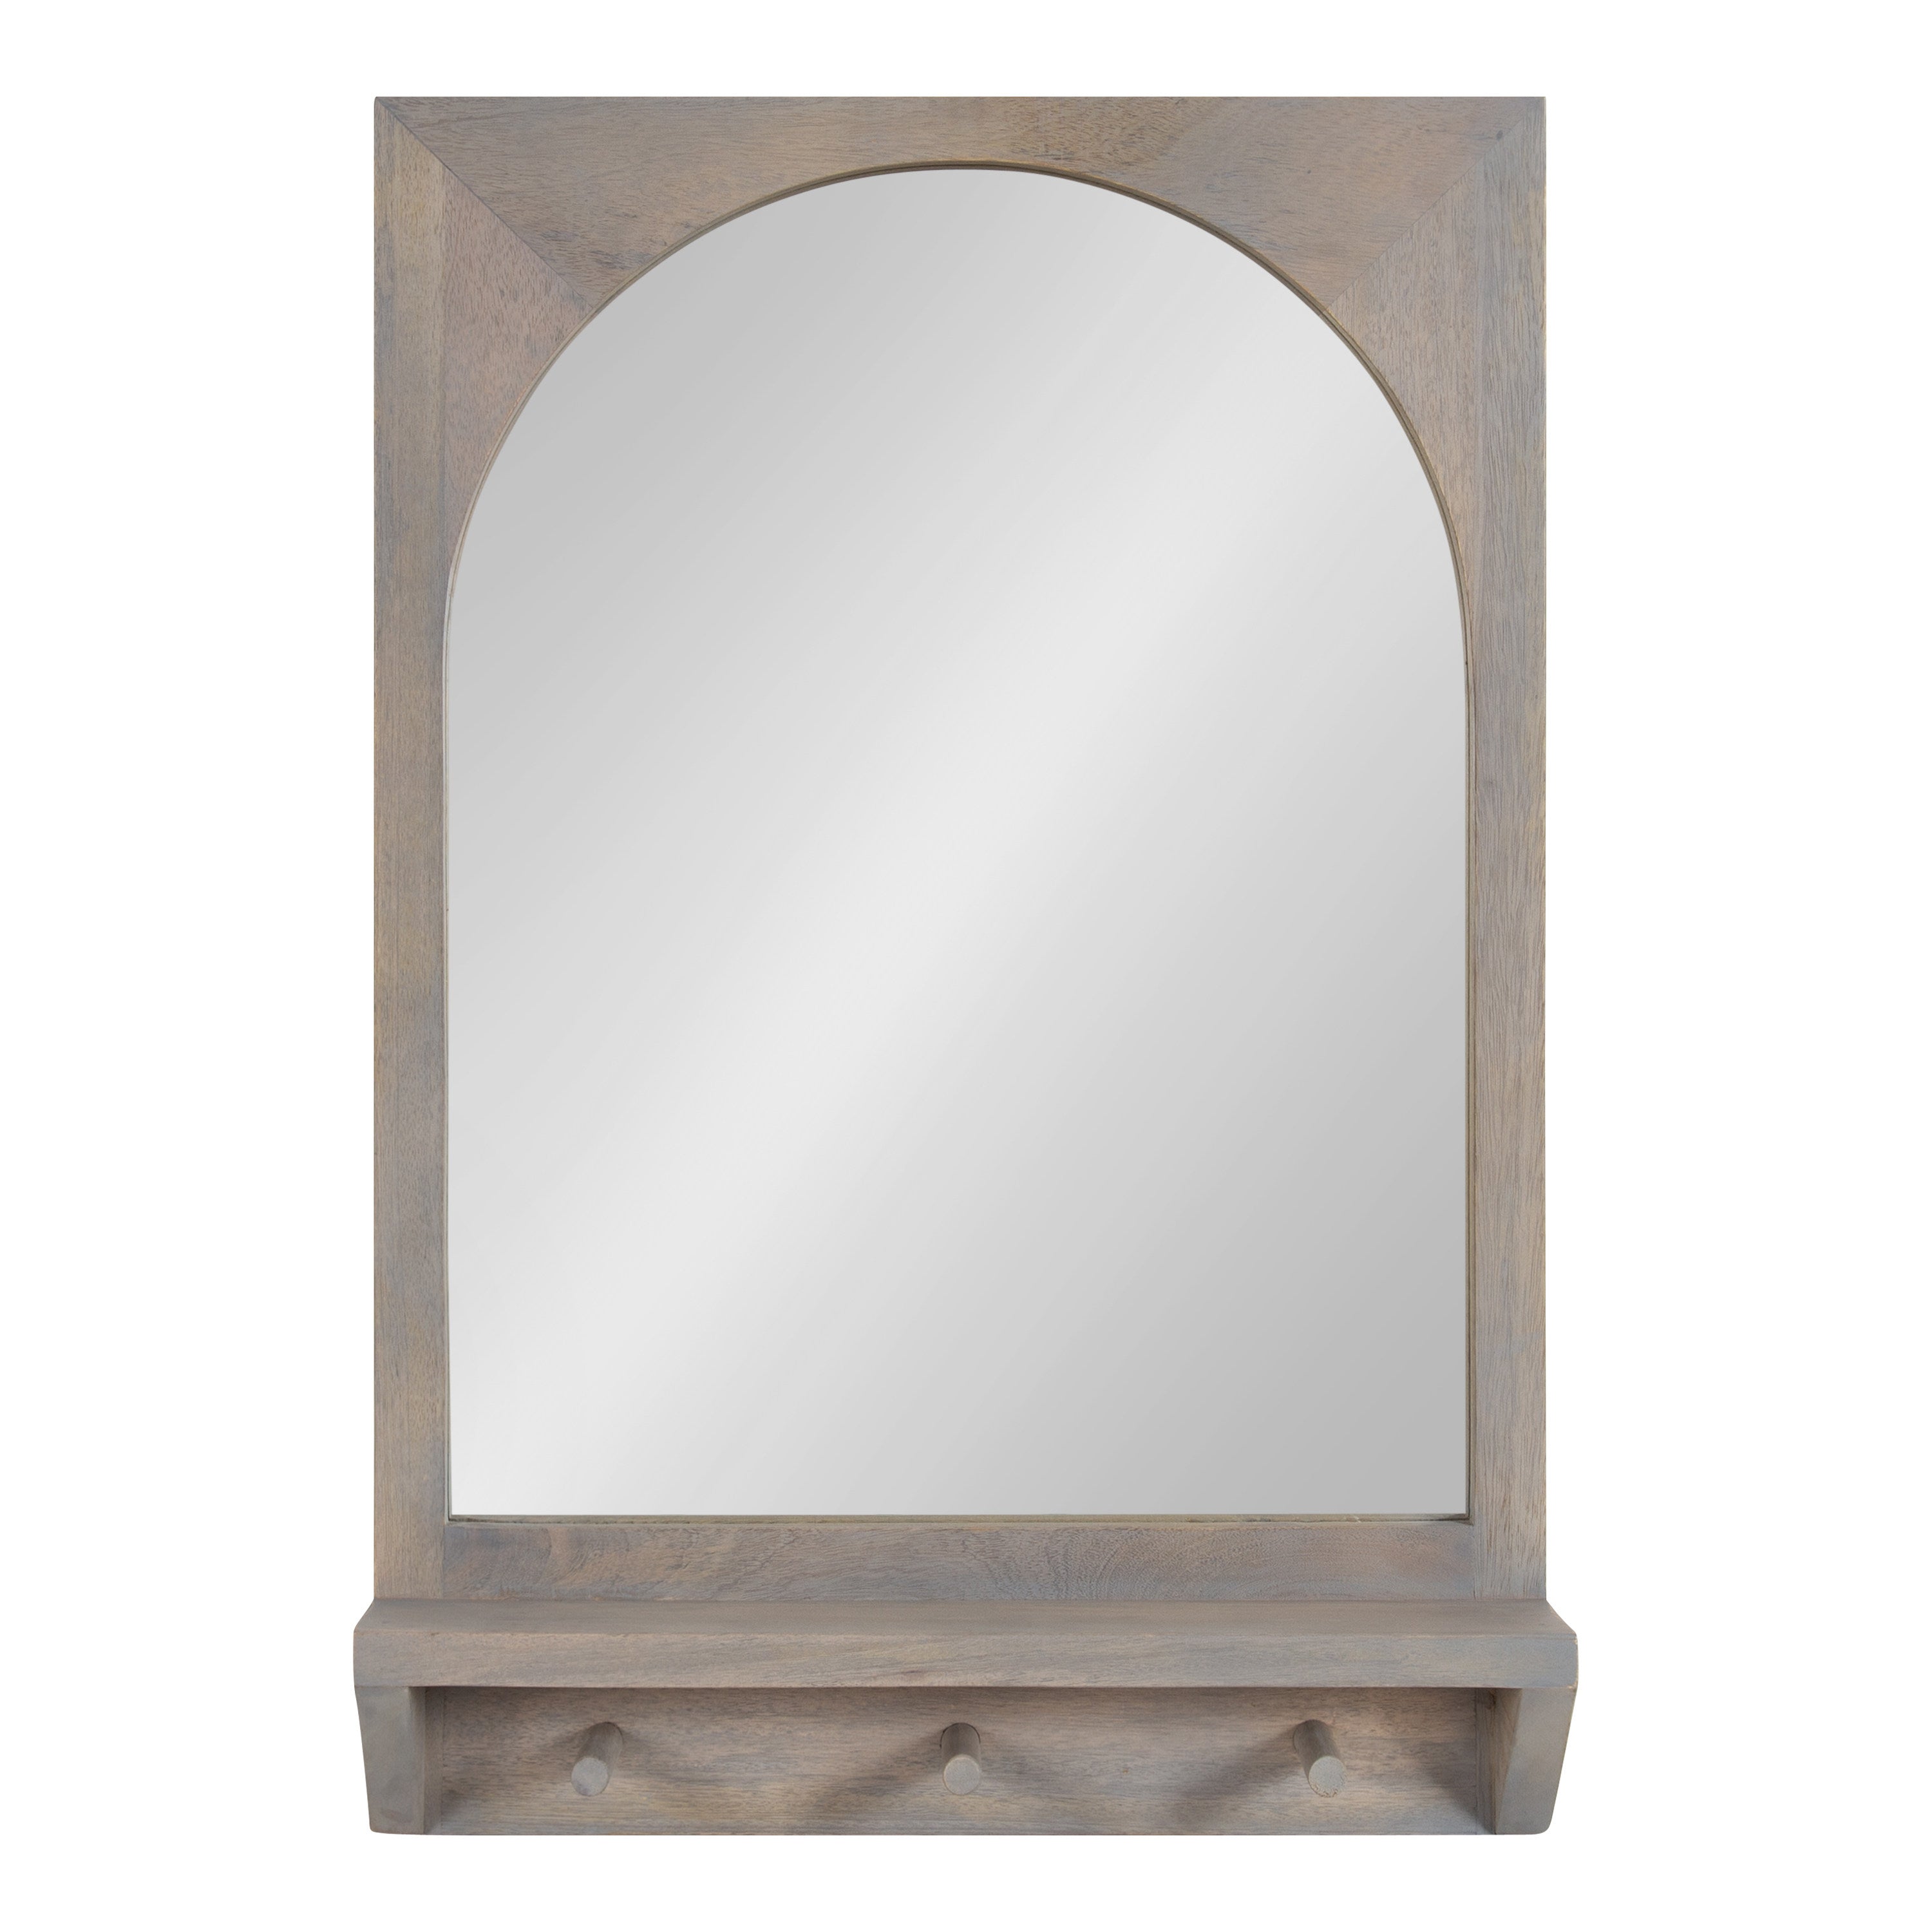 Andover Arch Mirror with Hooks